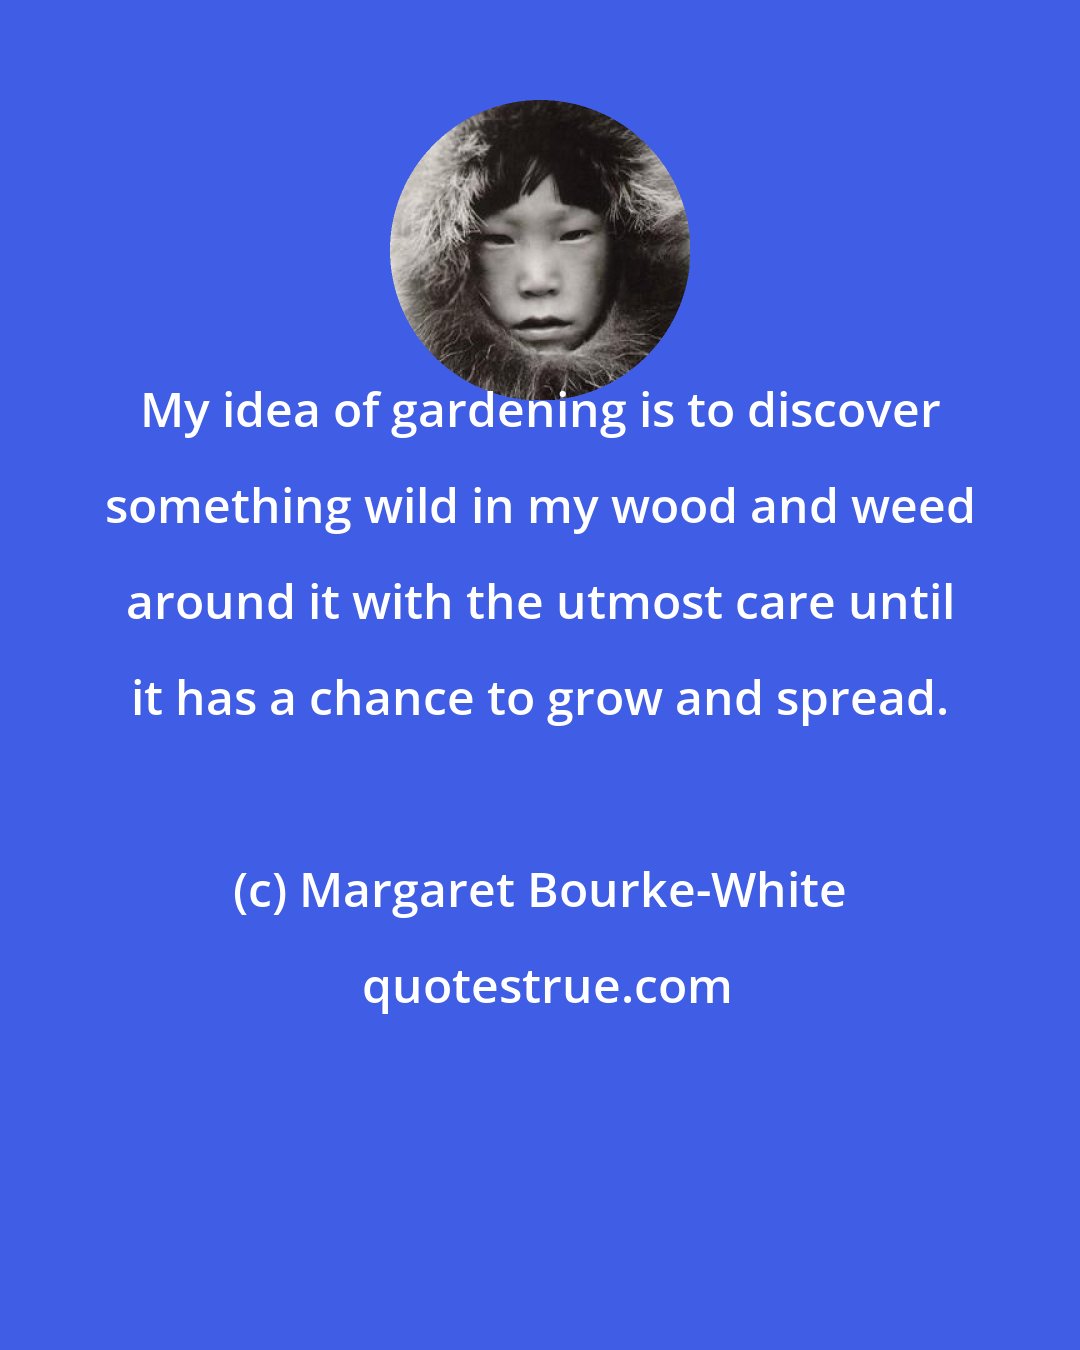 Margaret Bourke-White: My idea of gardening is to discover something wild in my wood and weed around it with the utmost care until it has a chance to grow and spread.